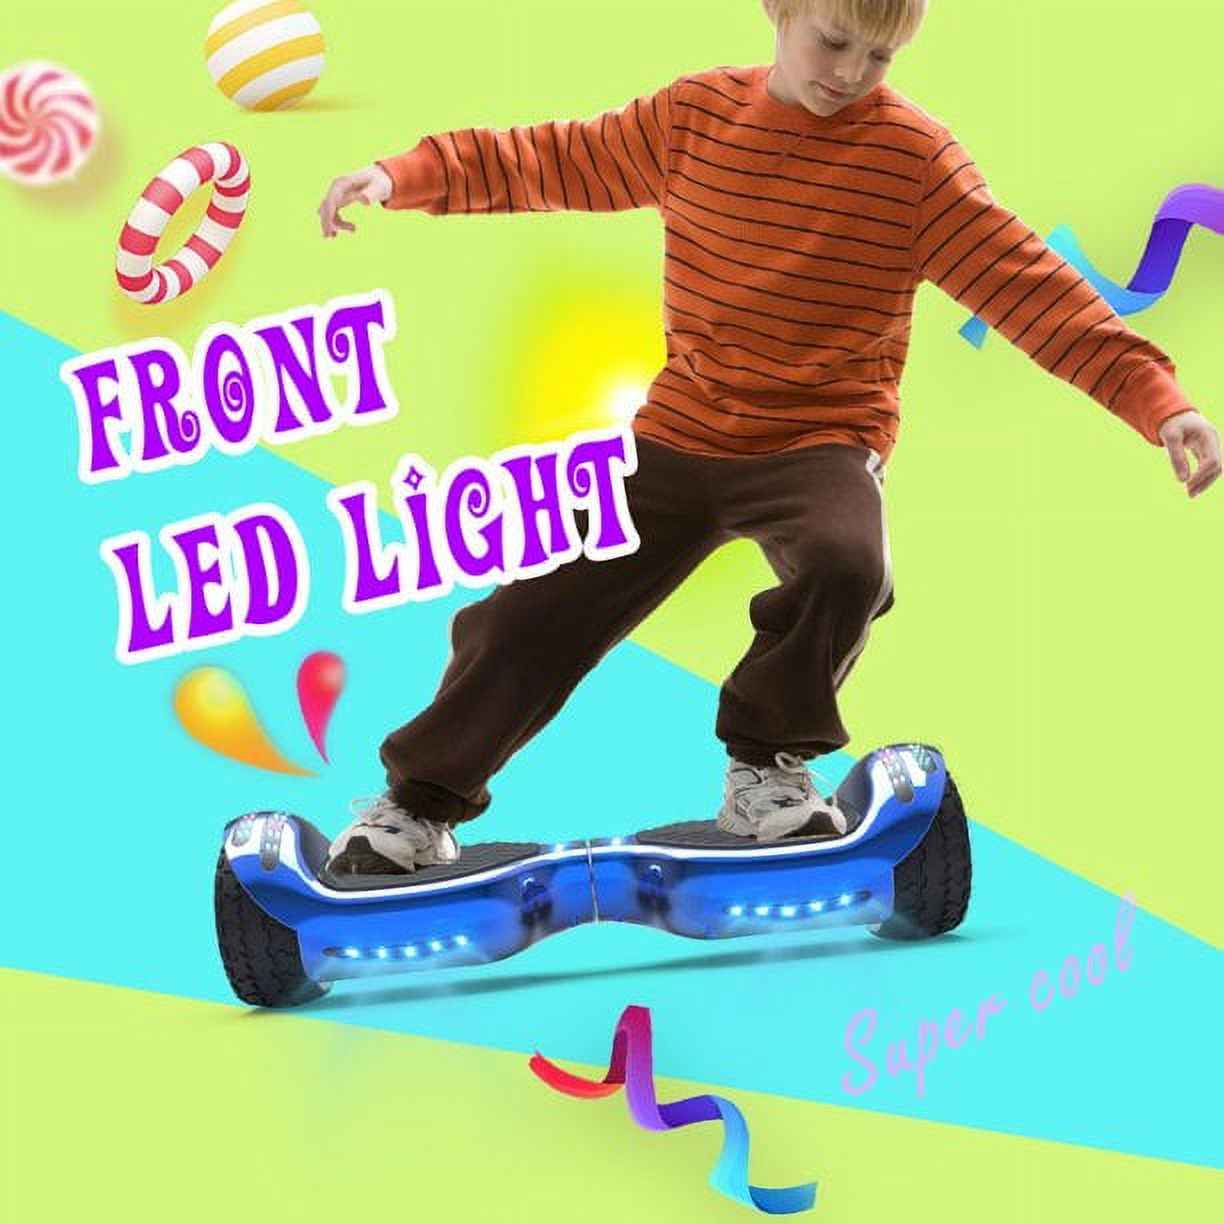 Hoverboard All-Terrain LED Flash Wide All Terrian Wheel with Bluetooth Speaker Dual LED Light Self Balancing Wheel Electric Scooter Chrome Blue - image 5 of 5